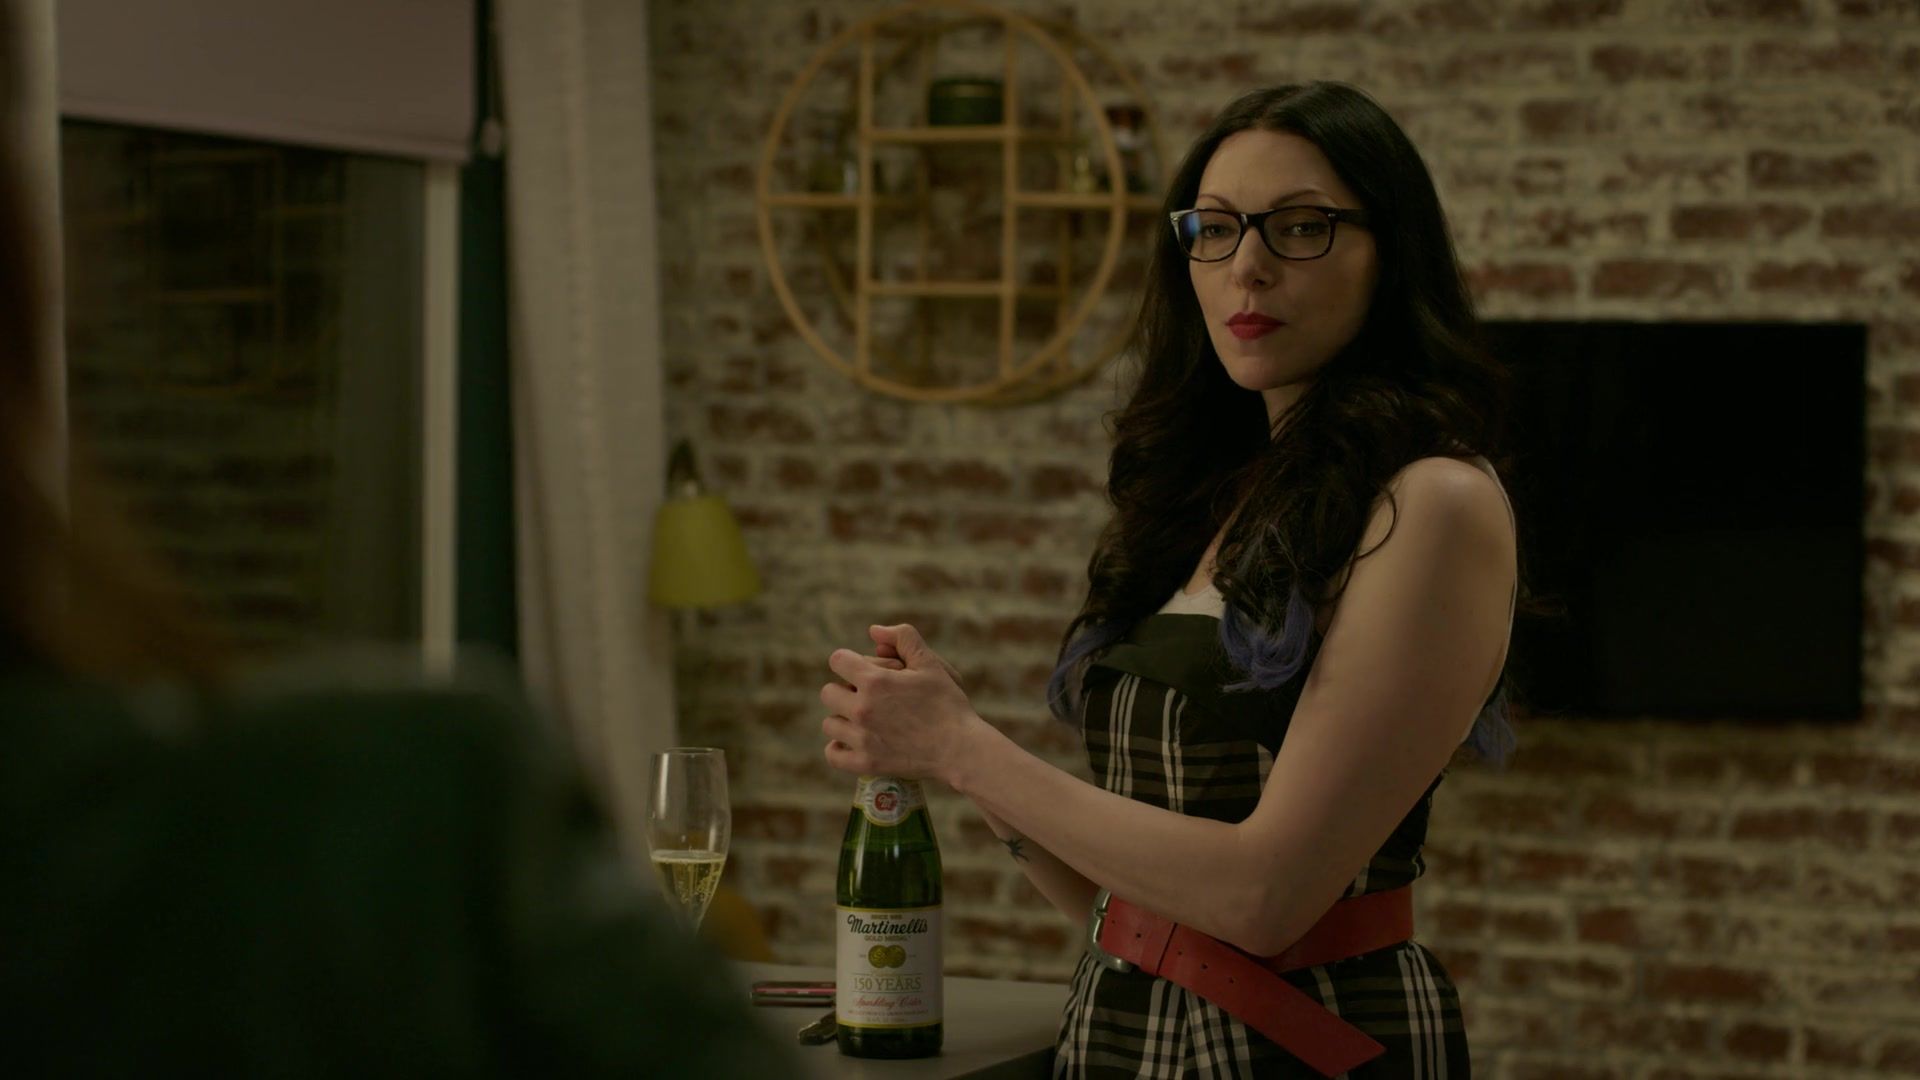 Martinelli's Sparkling Cider Enjoyed by Laura Prepon as Alex Vause